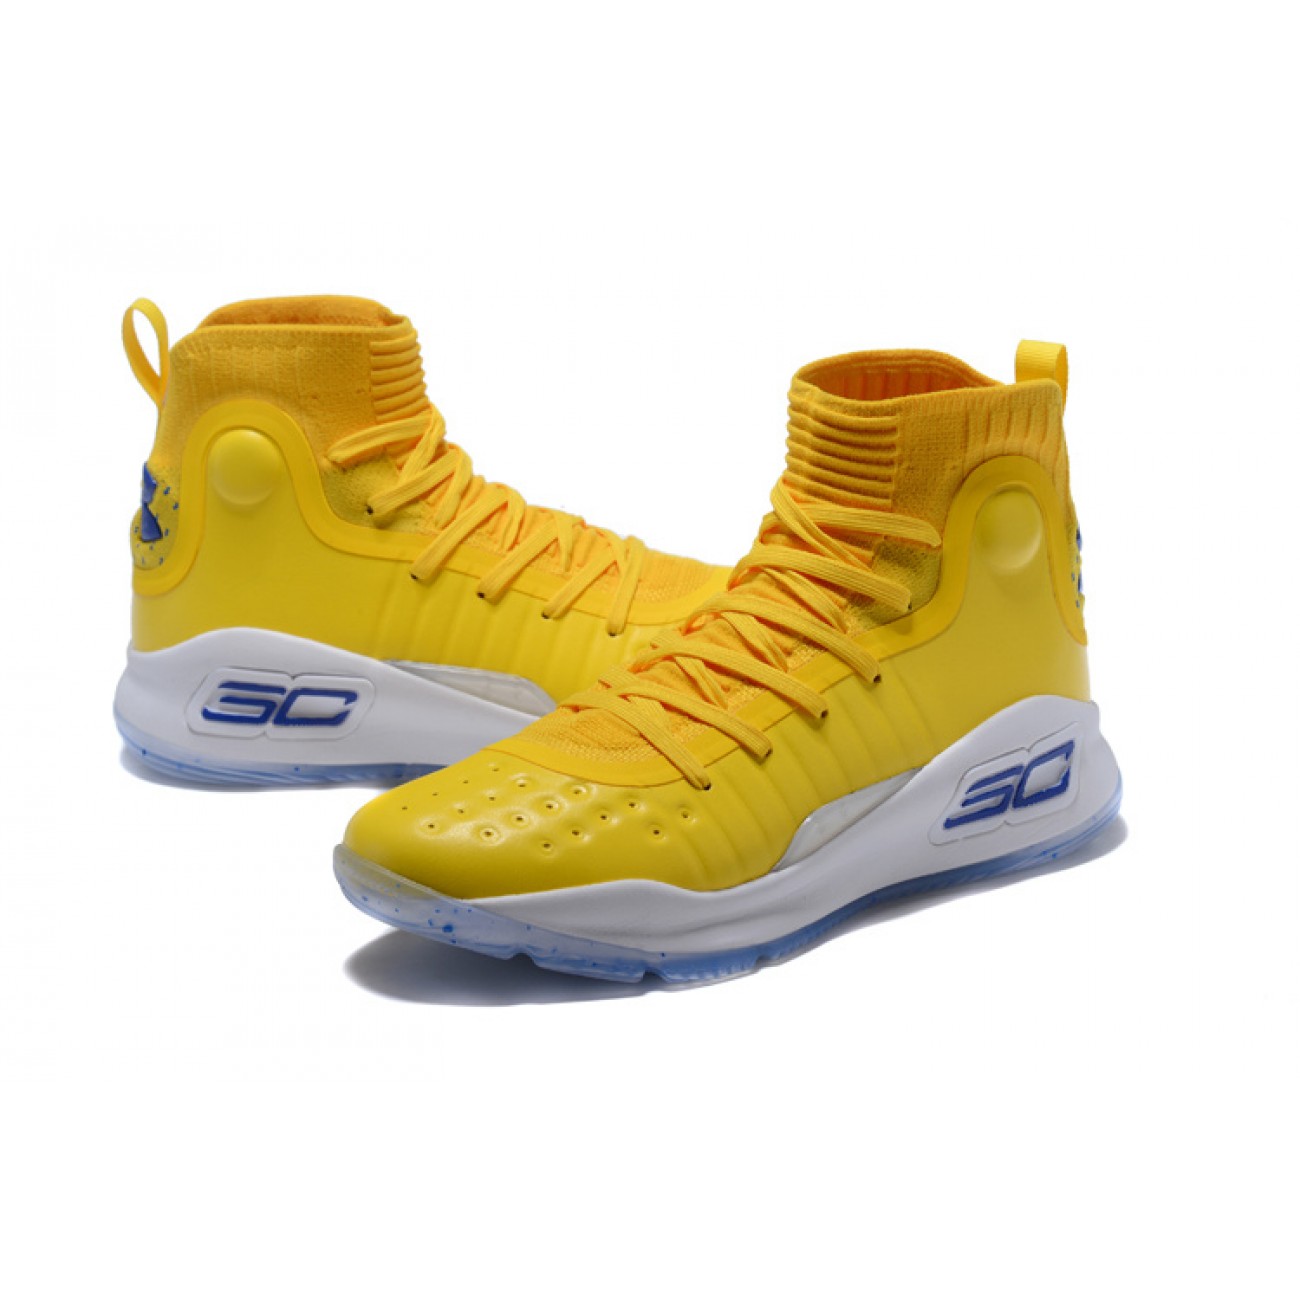 Under Armour UA Curry 4 "Braves" Yellow/Blue/White